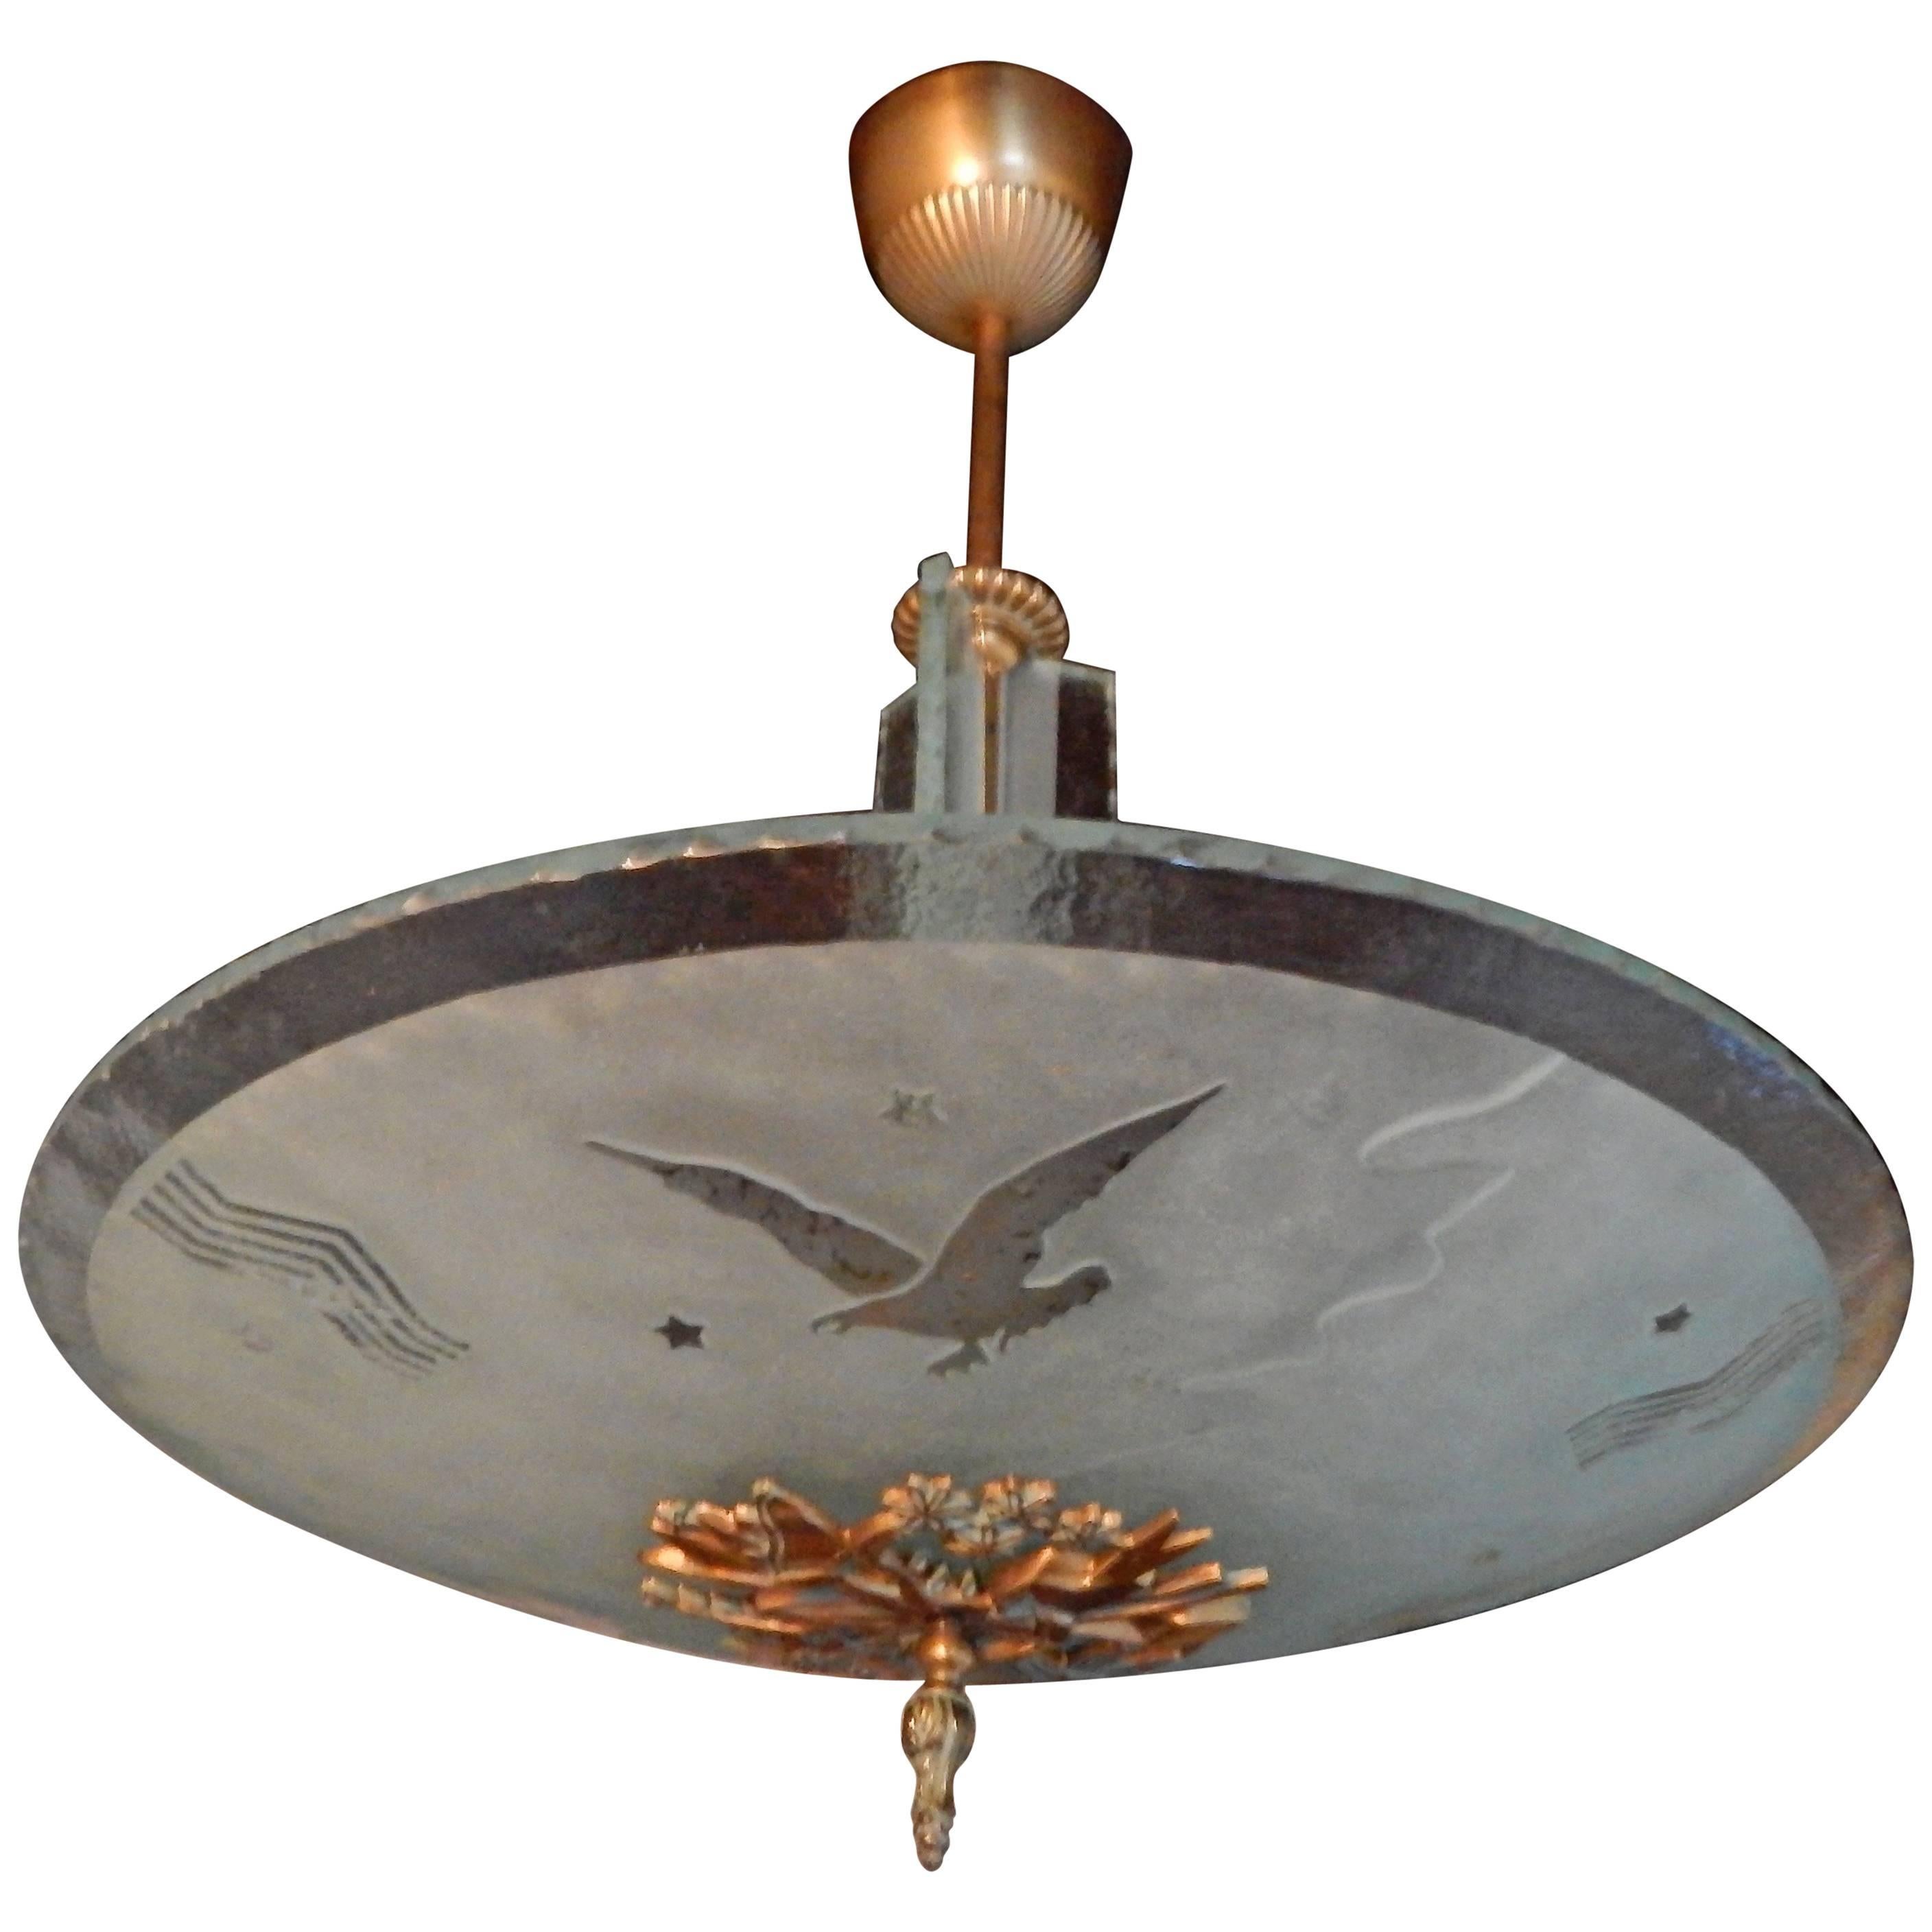 Swedish Art Deco Acid Etched Eagle Fixture by Glössner, circa 1930 For Sale